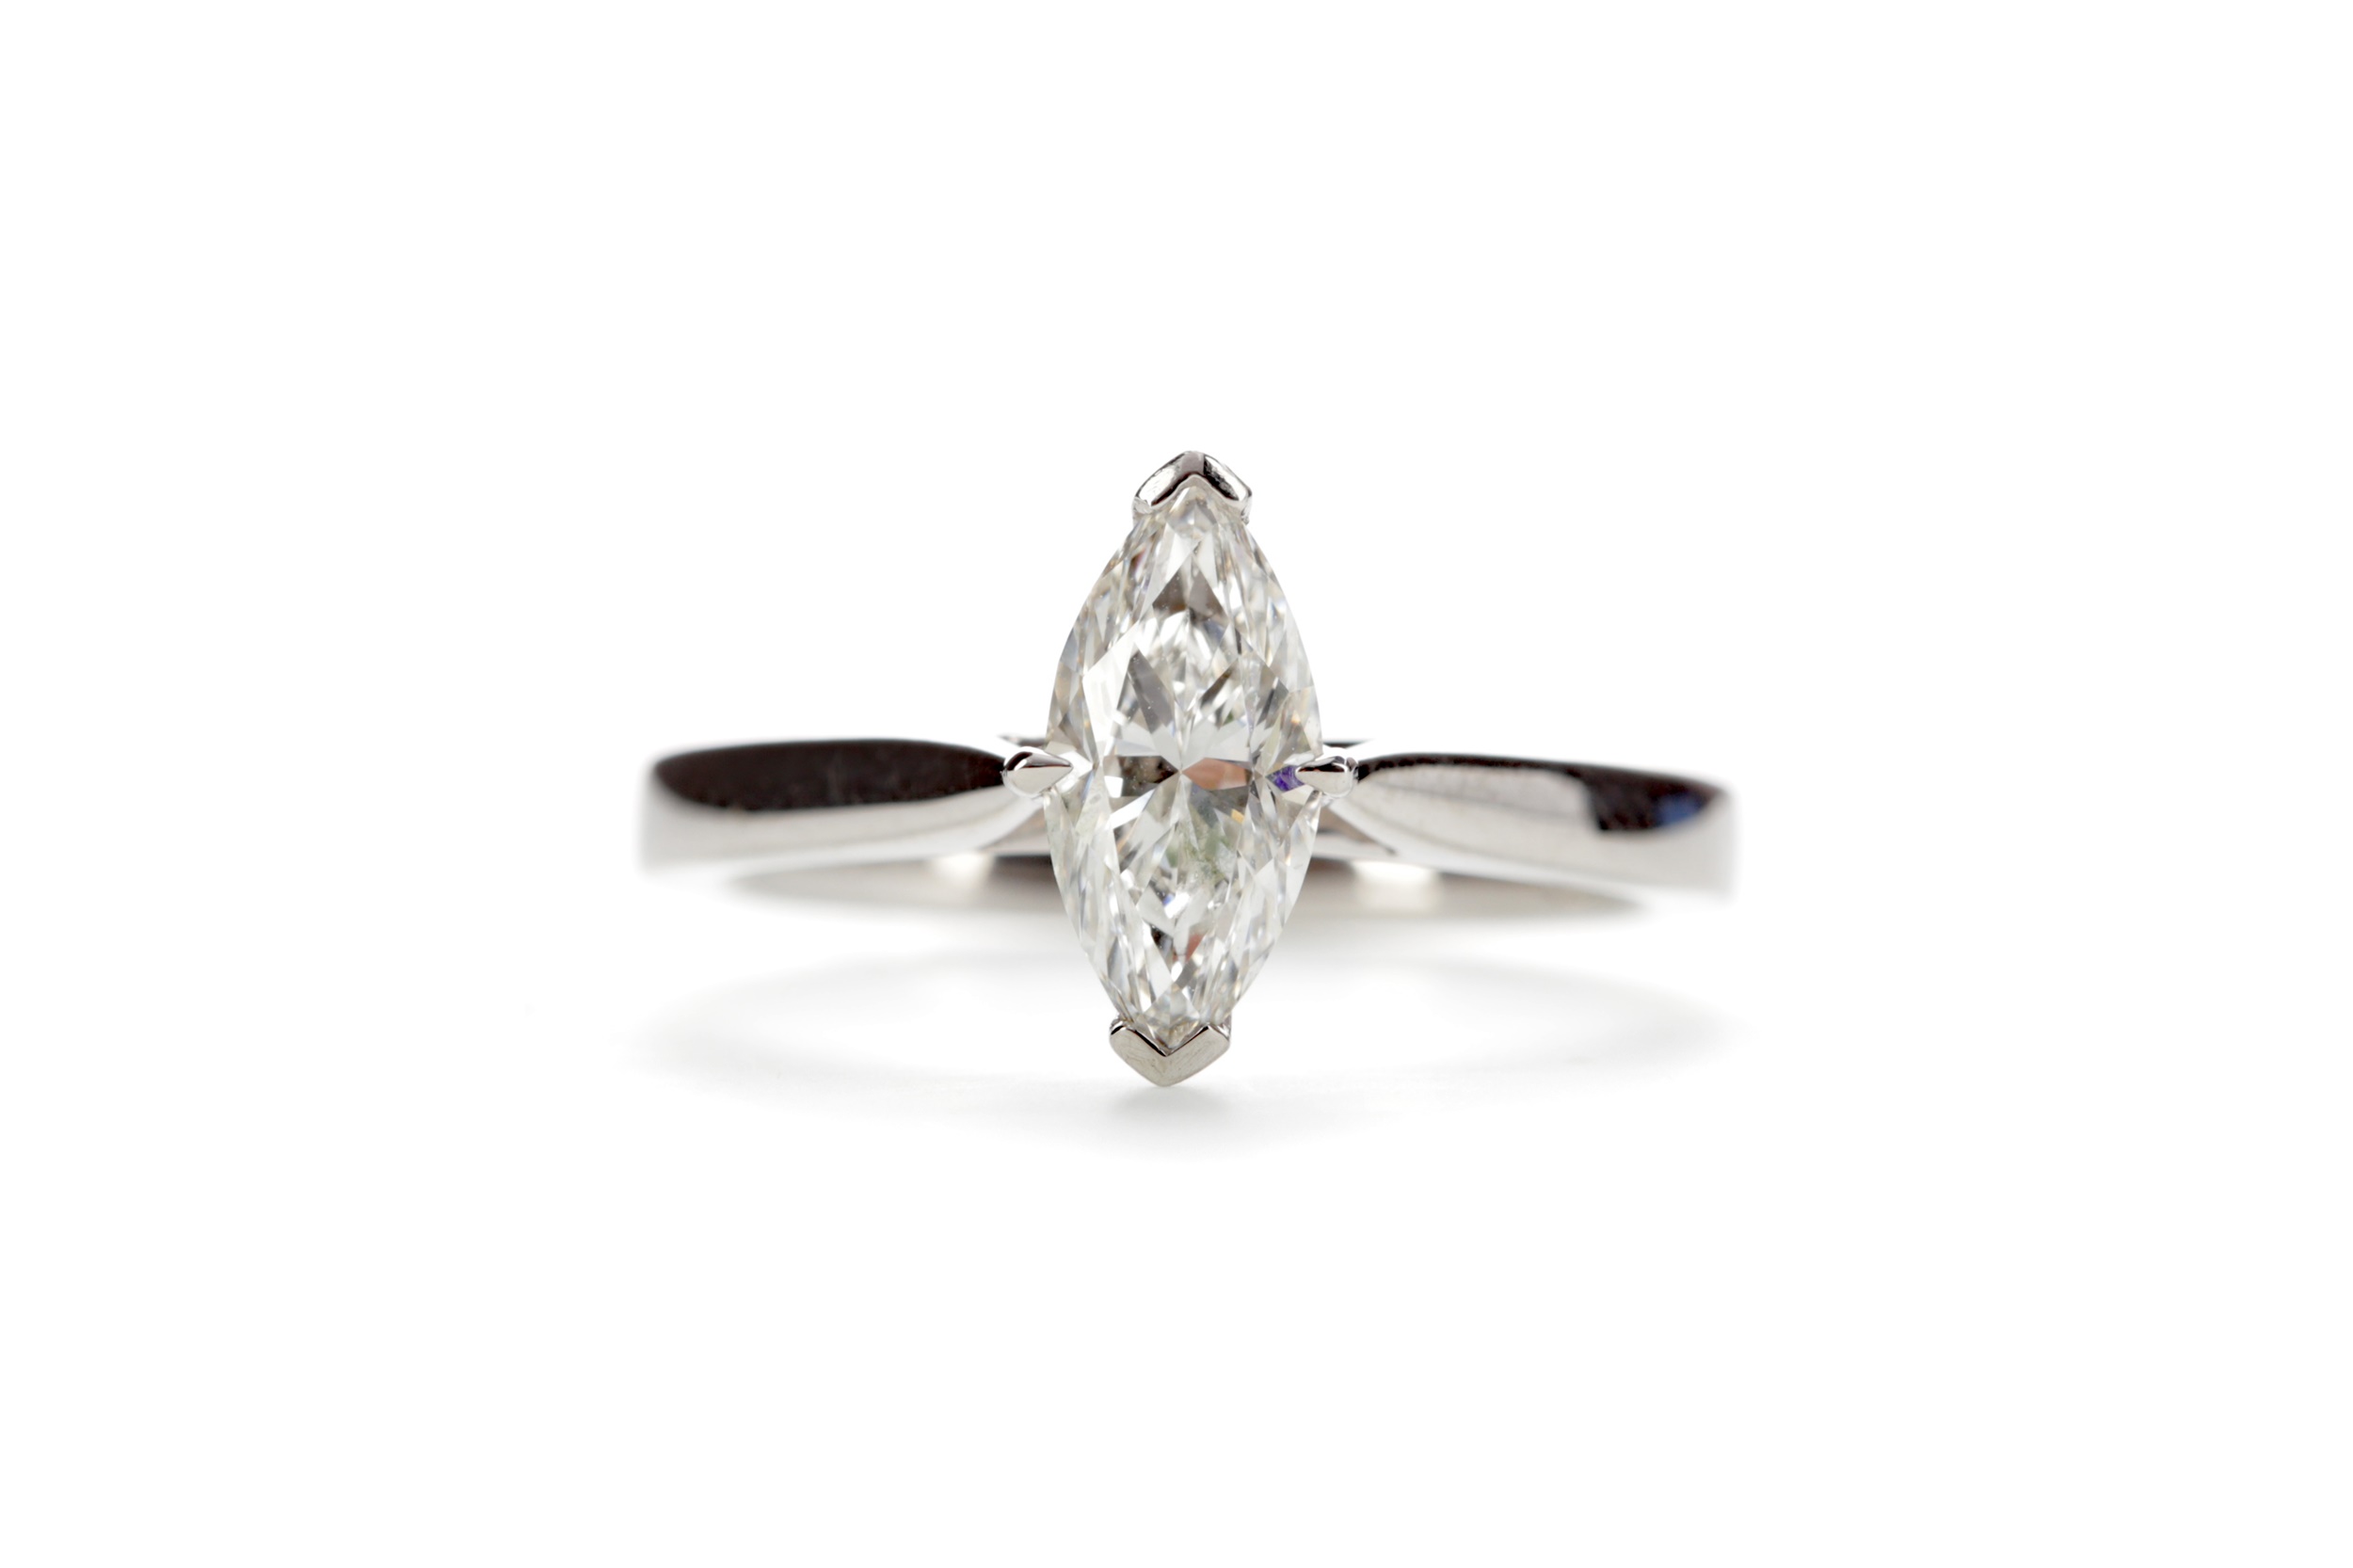 A GIA CERTIFICATED DIAMOND SOLITAIRE RING